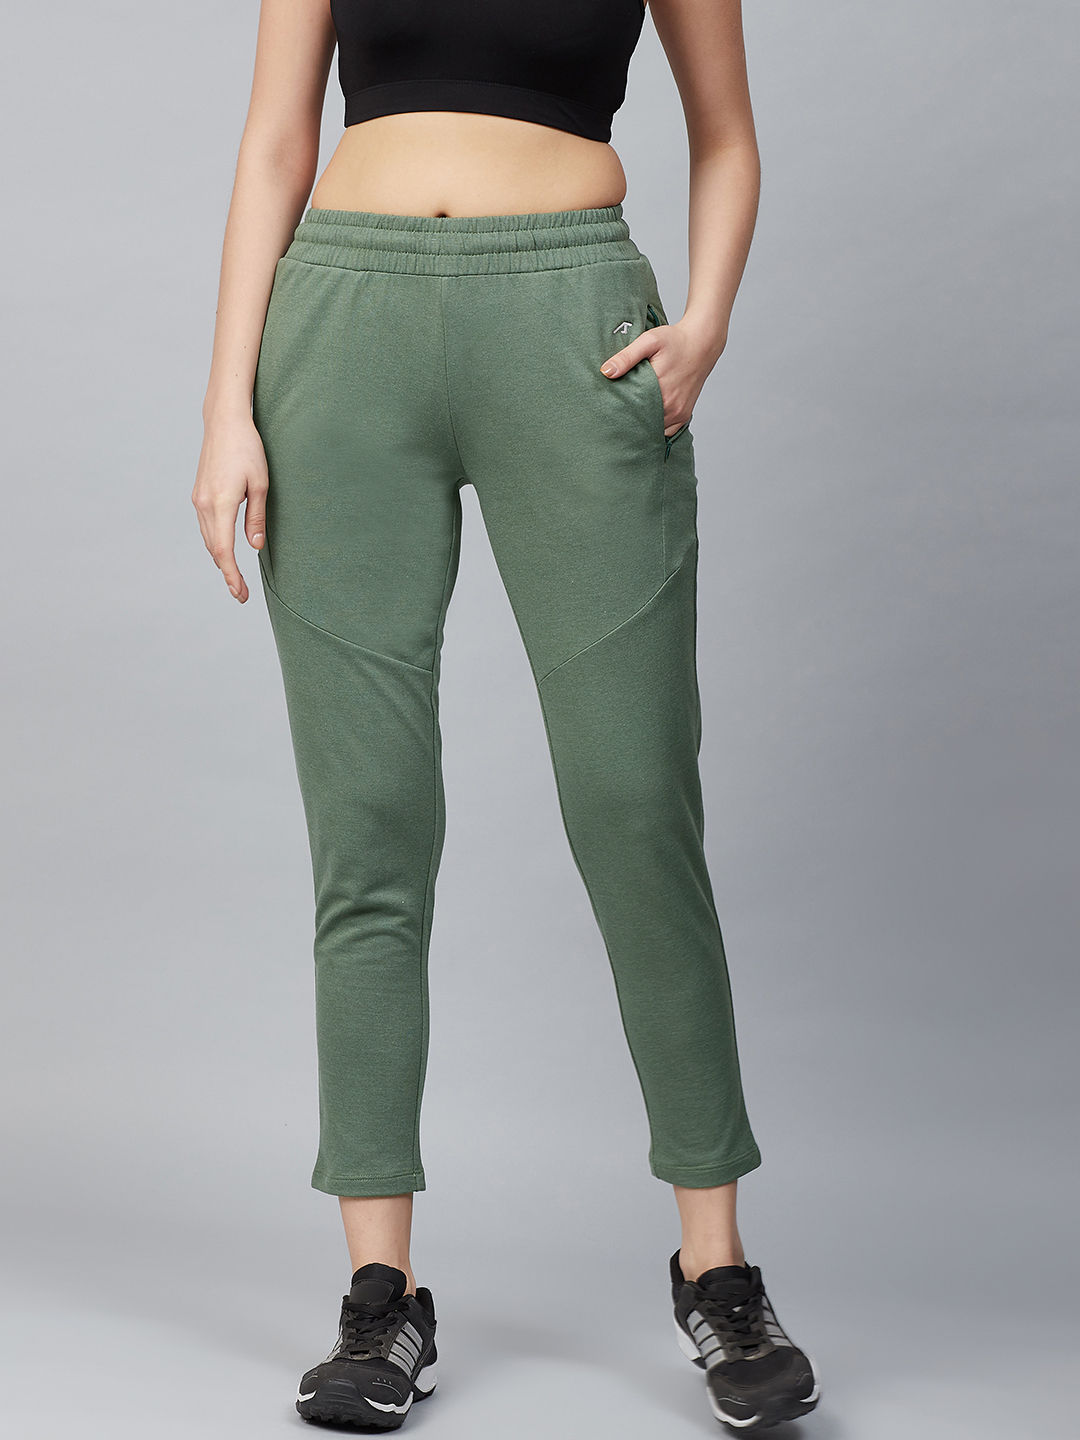 Cargo Pants for Women 6 Best Cargo Pants for Women in India Starting Just  at Rs 579  The Economic Times